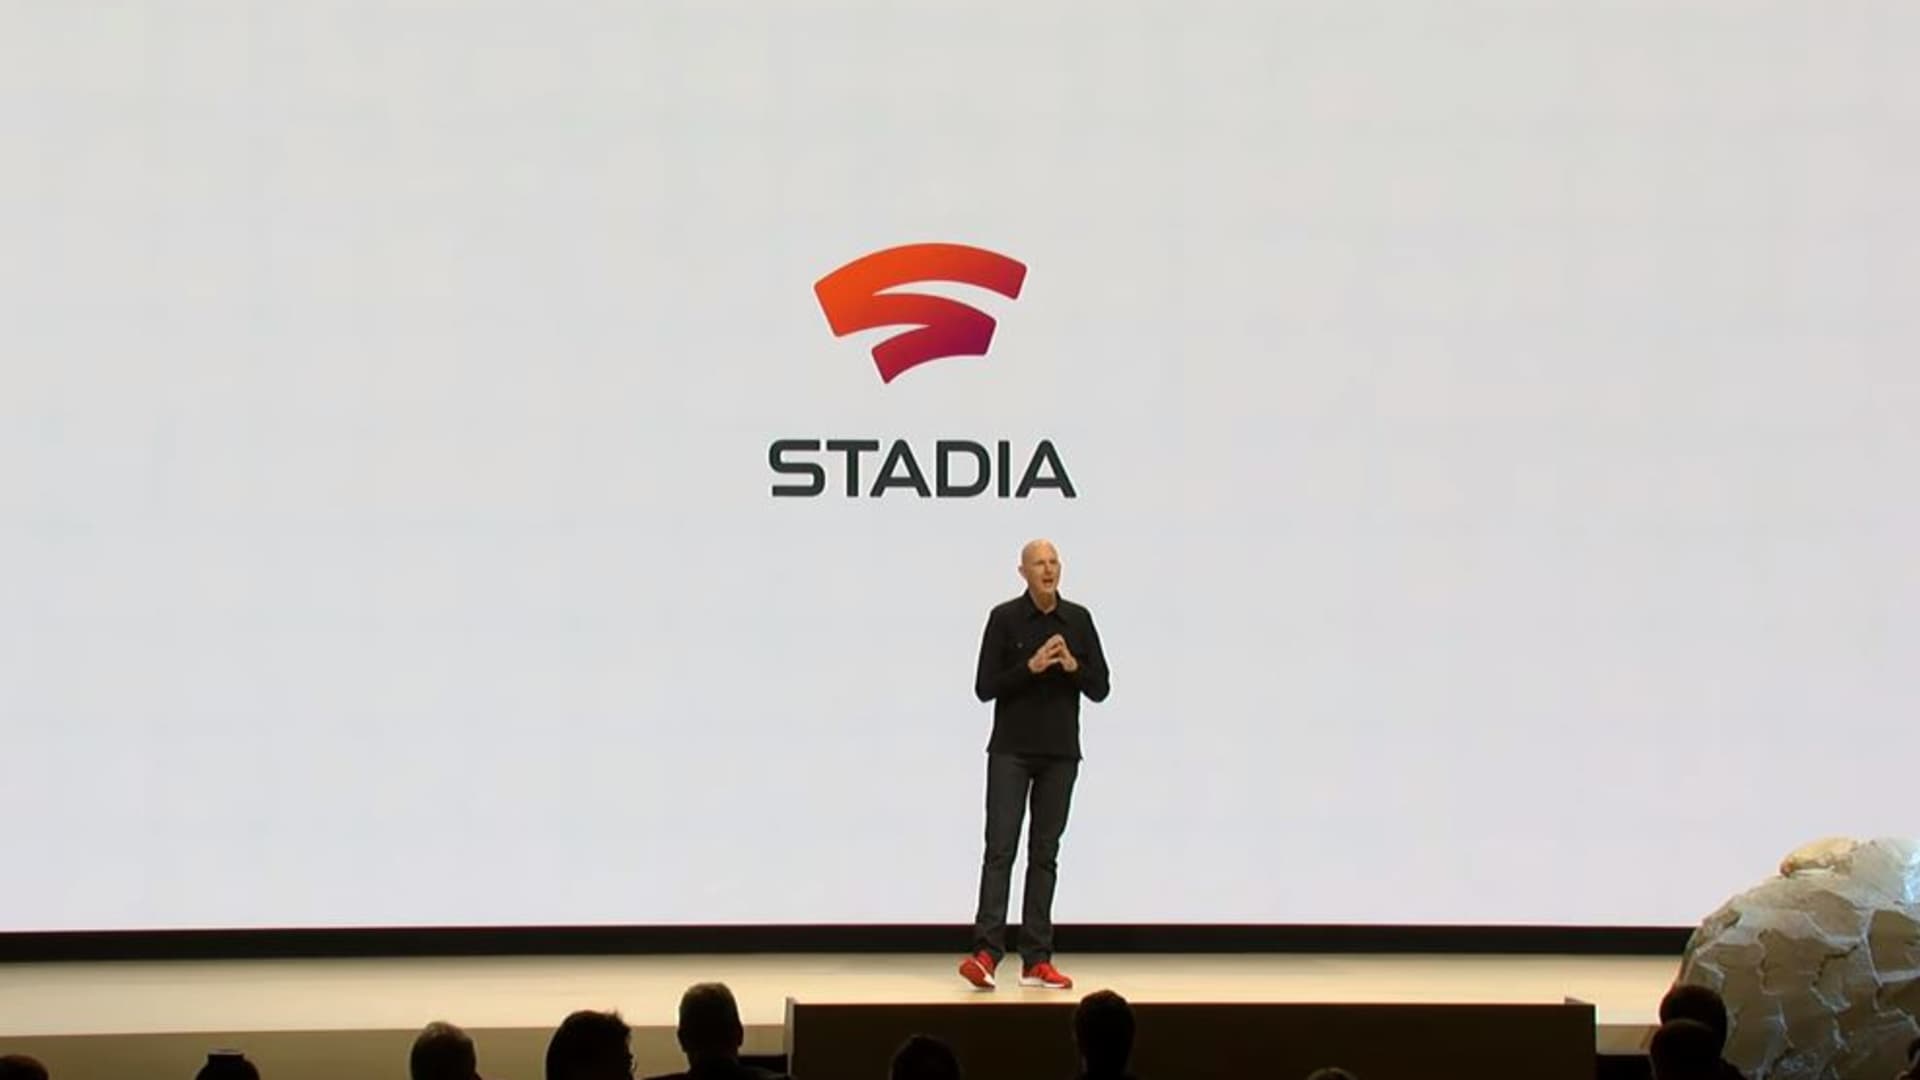 Google to close down gaming service Stadia as CEO Pichai continues cost-cutting efforts